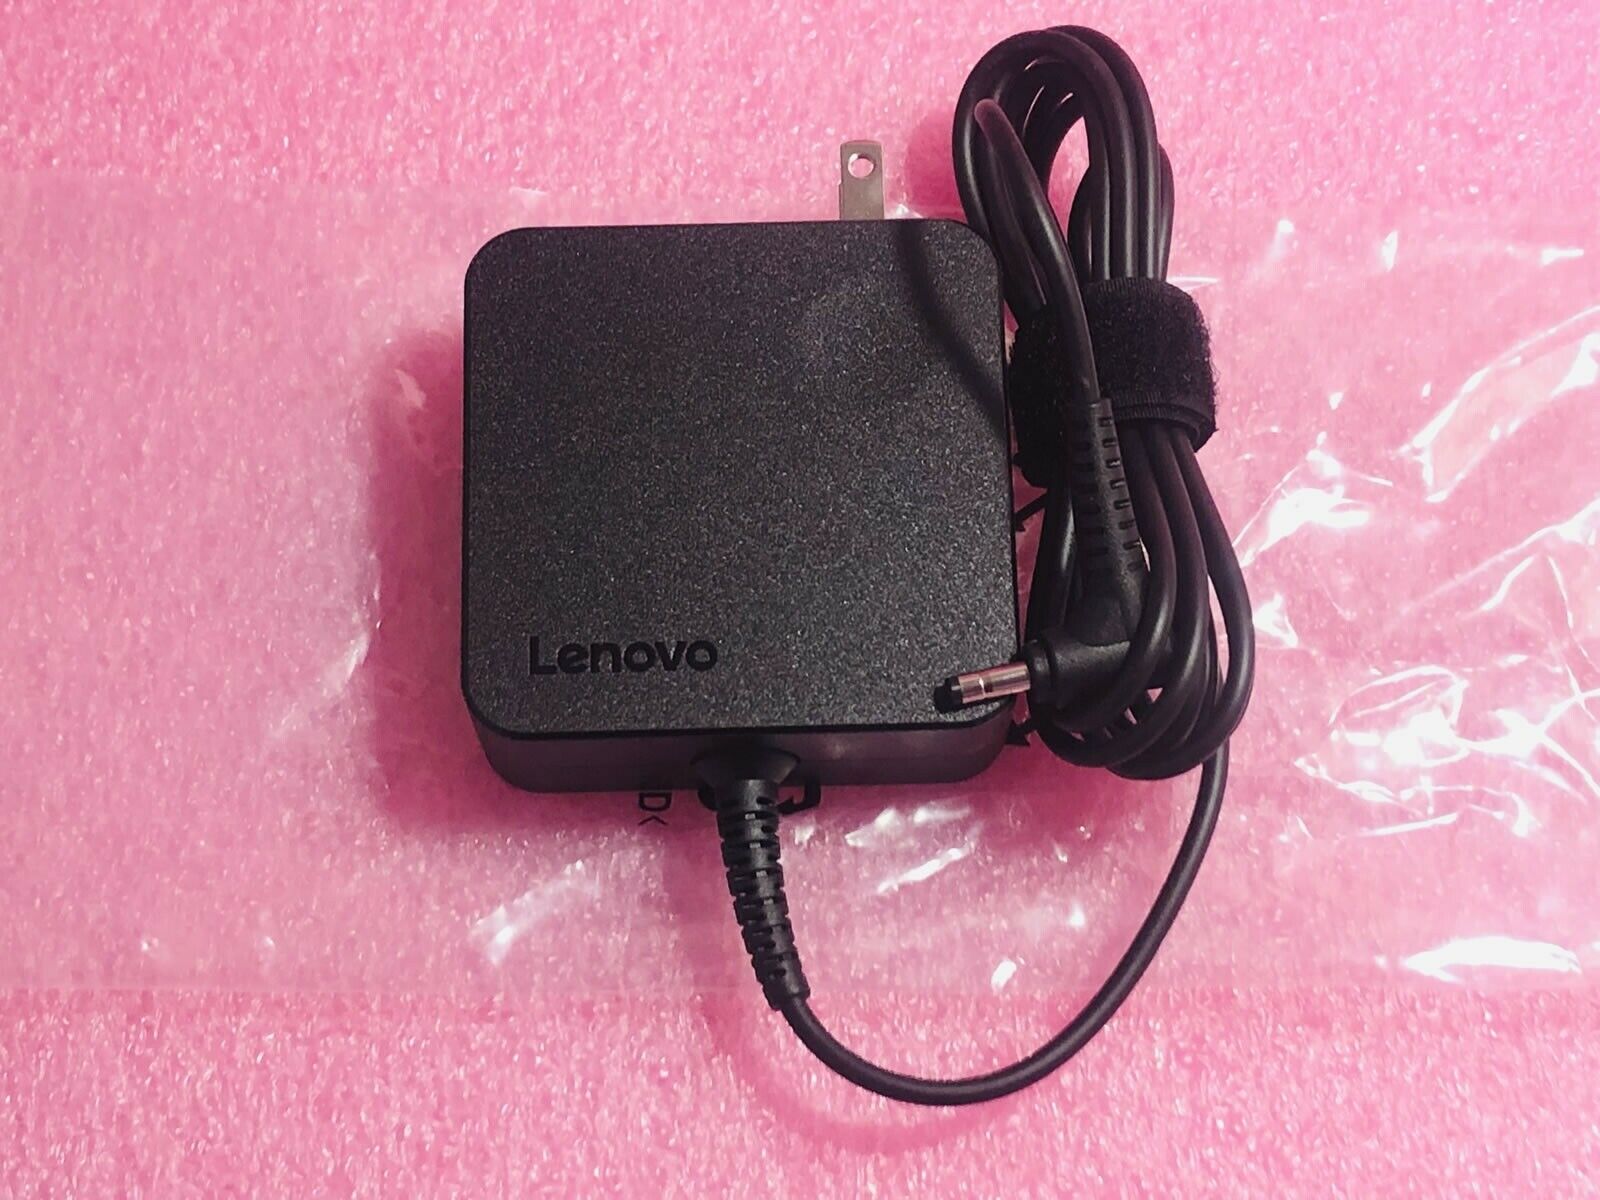 Genuine Lenovo 65W AC Power Laptop Charger Adapter IdeaPad S340 81N8005DUS Brand: Lenovo Type: Power Adapter Compa